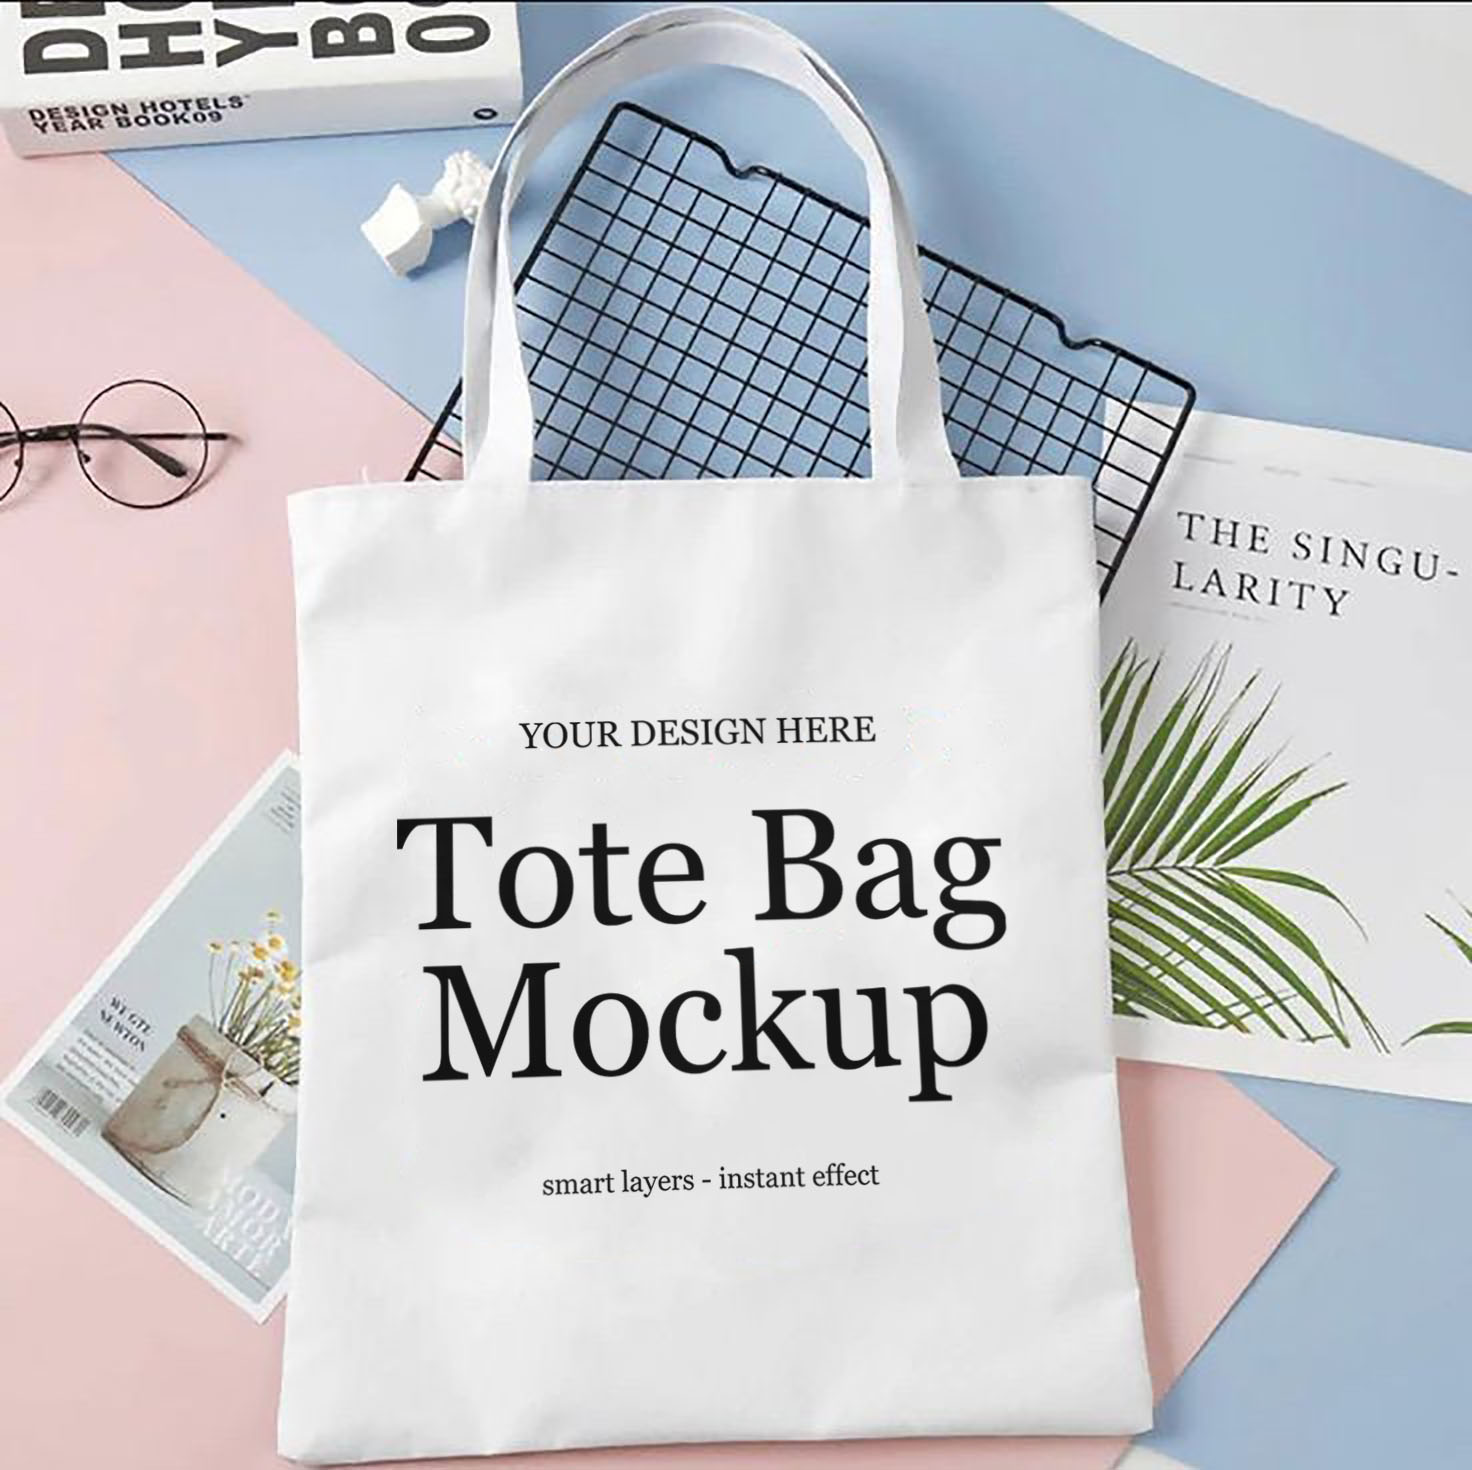 Free PSD White Canvas Tote Bag Mockup Download 84 by diosvolt on DeviantArt